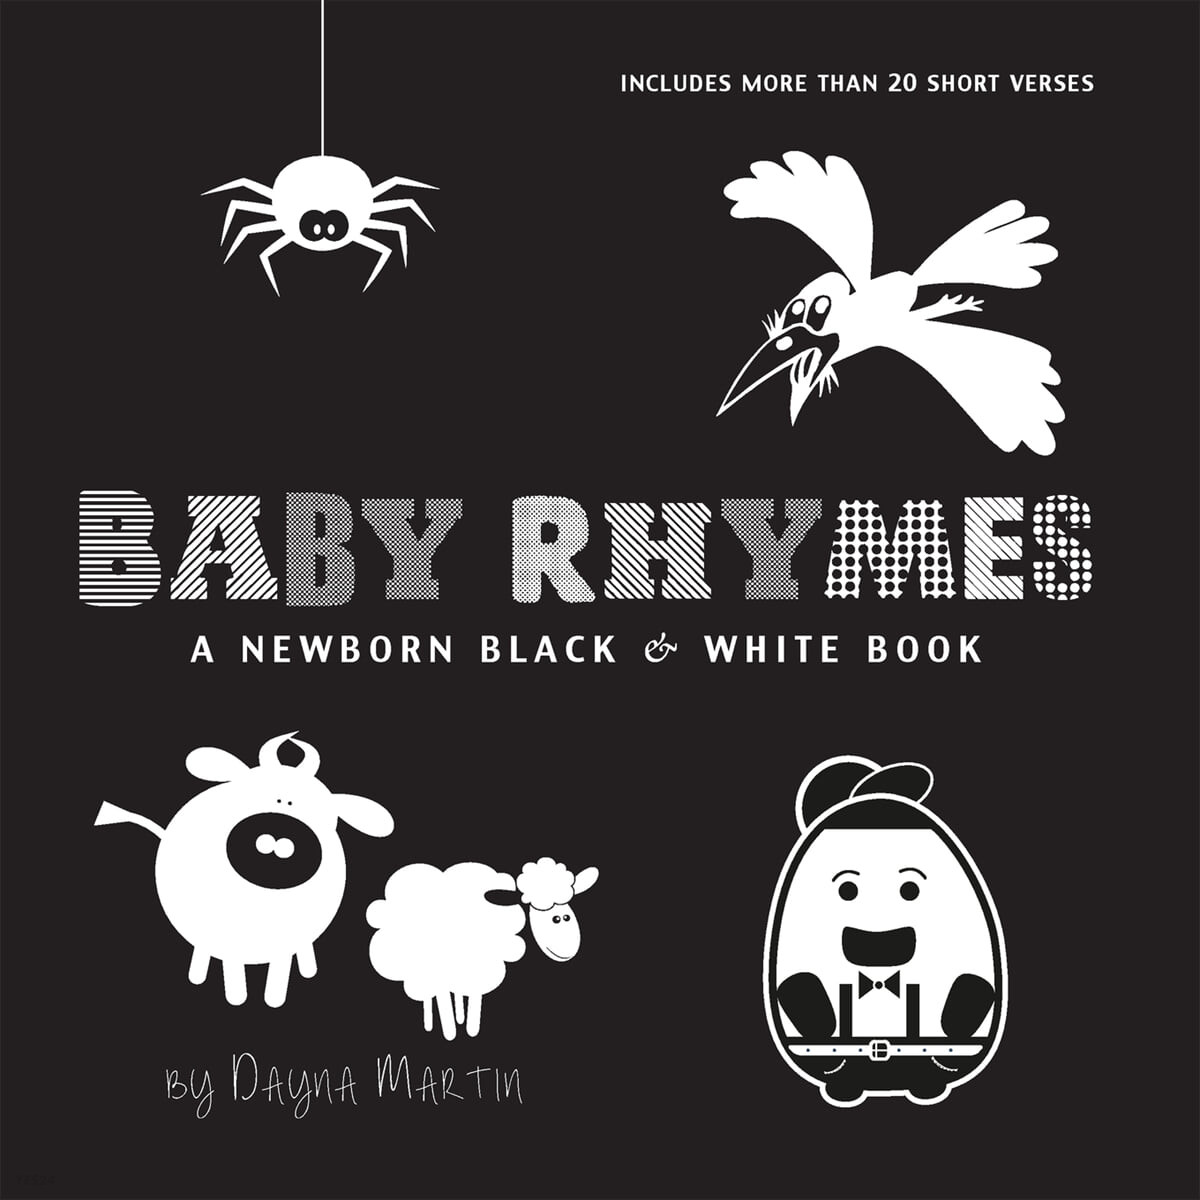 Baby Rhymes (A Newborn Black & White Book: 22 Short Verses, Humpty Dumpty, Jack and Jill, Little Miss Muffet, This Little Piggy, Rub-a-dub-dub, and More (Engage Early Readers: Children’s Learning Books))